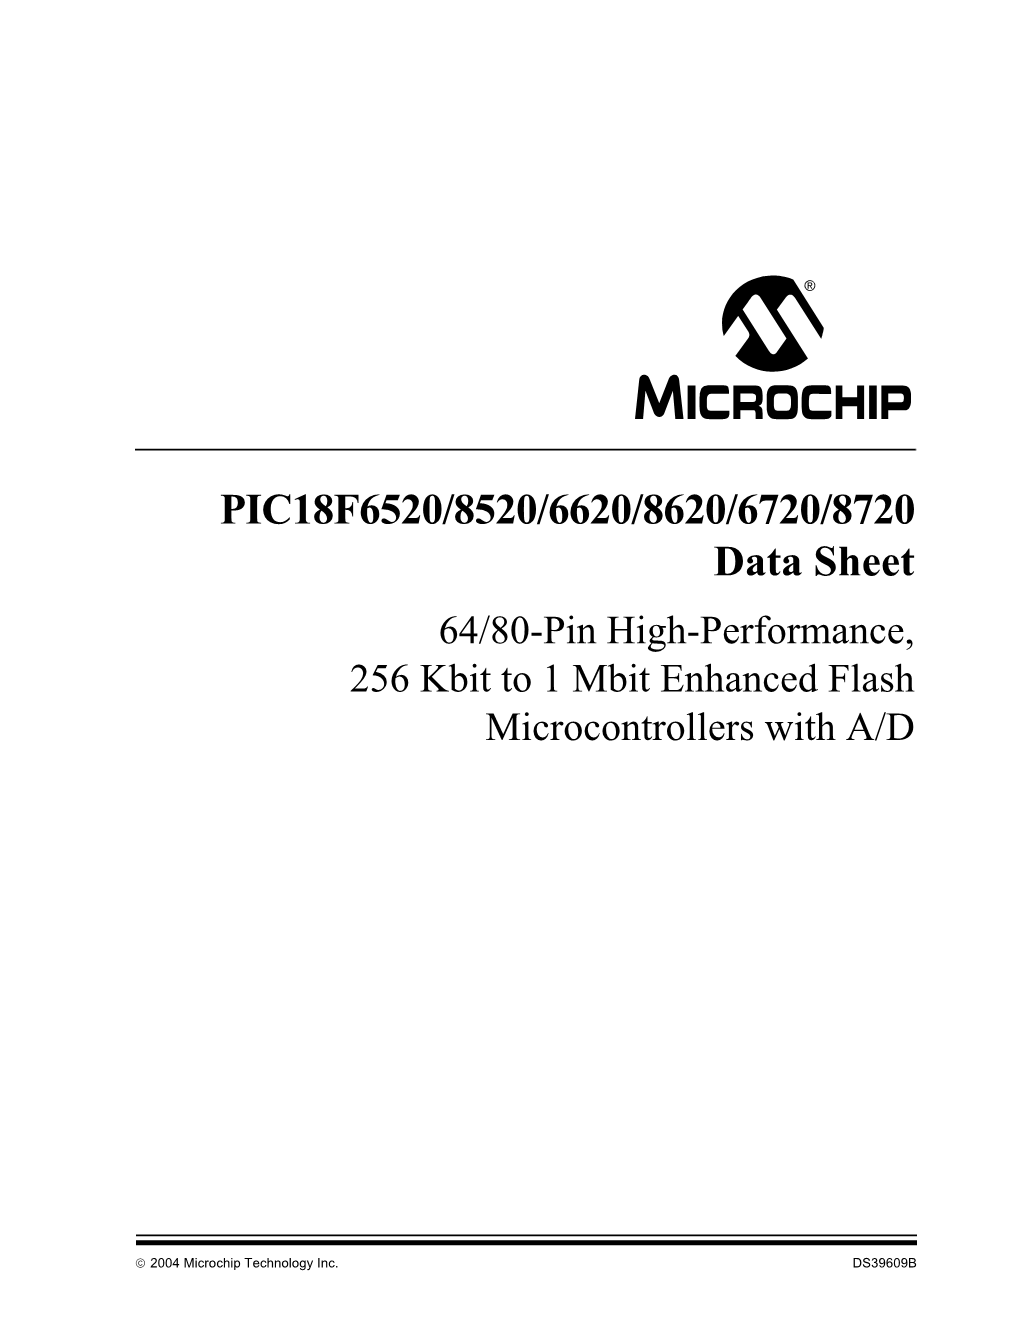 PIC18F6520/8520/6620/8620/6720/8720 Data Sheet 64/80-Pin High-Performance, 256 Kbit to 1 Mbit Enhanced Flash Microcontrollers with A/D